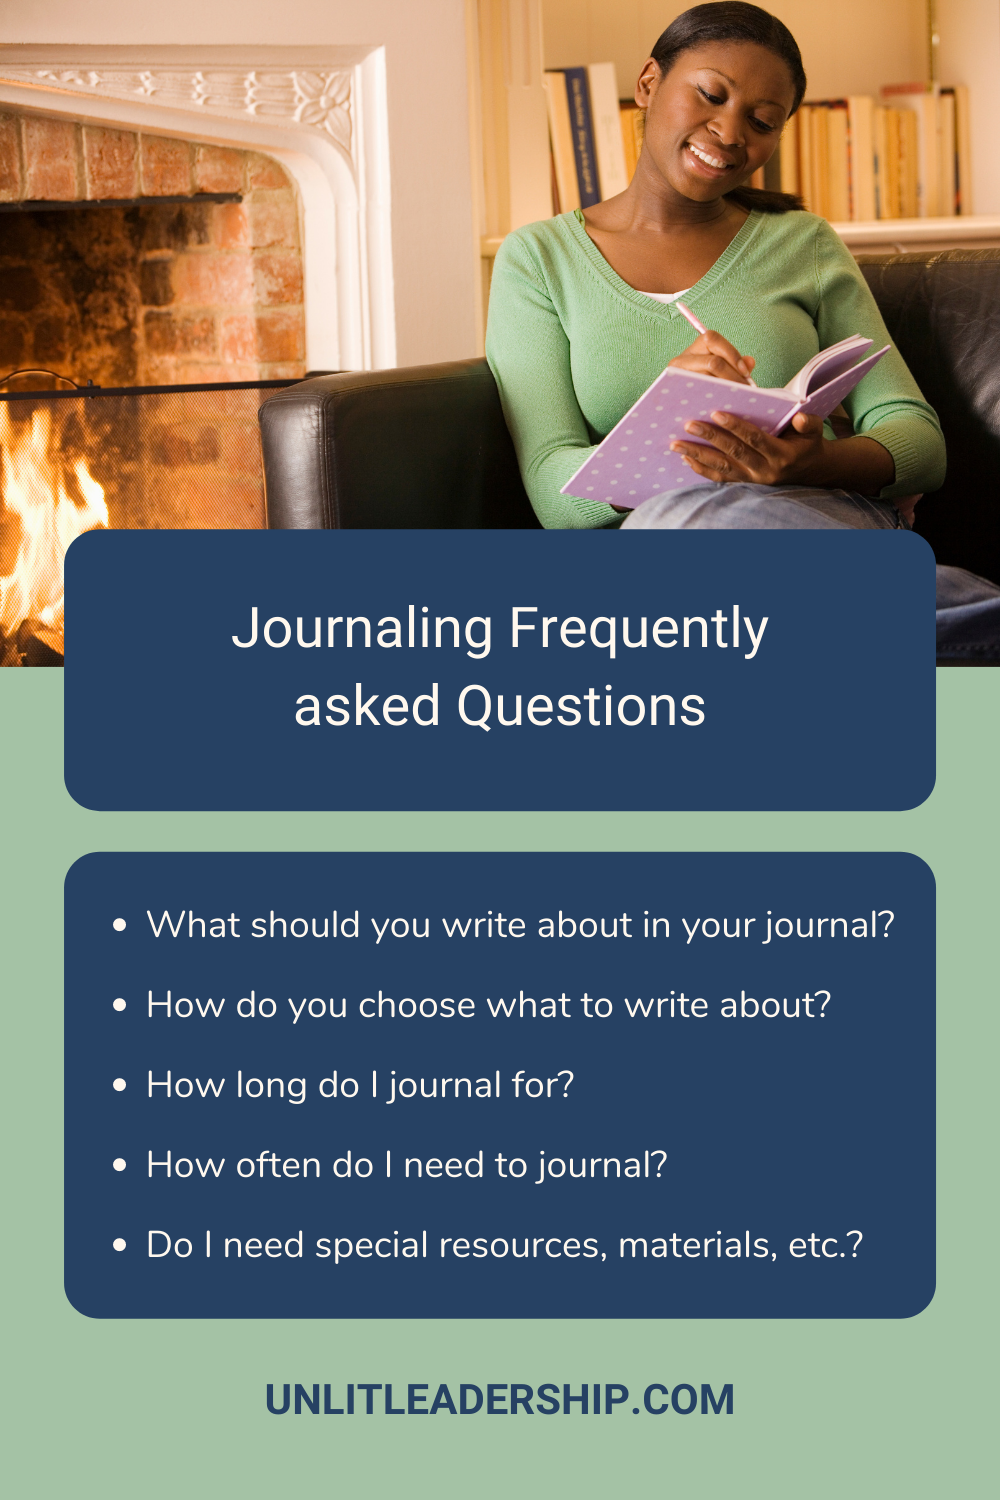 Journaling Frequently asked questions pinterest